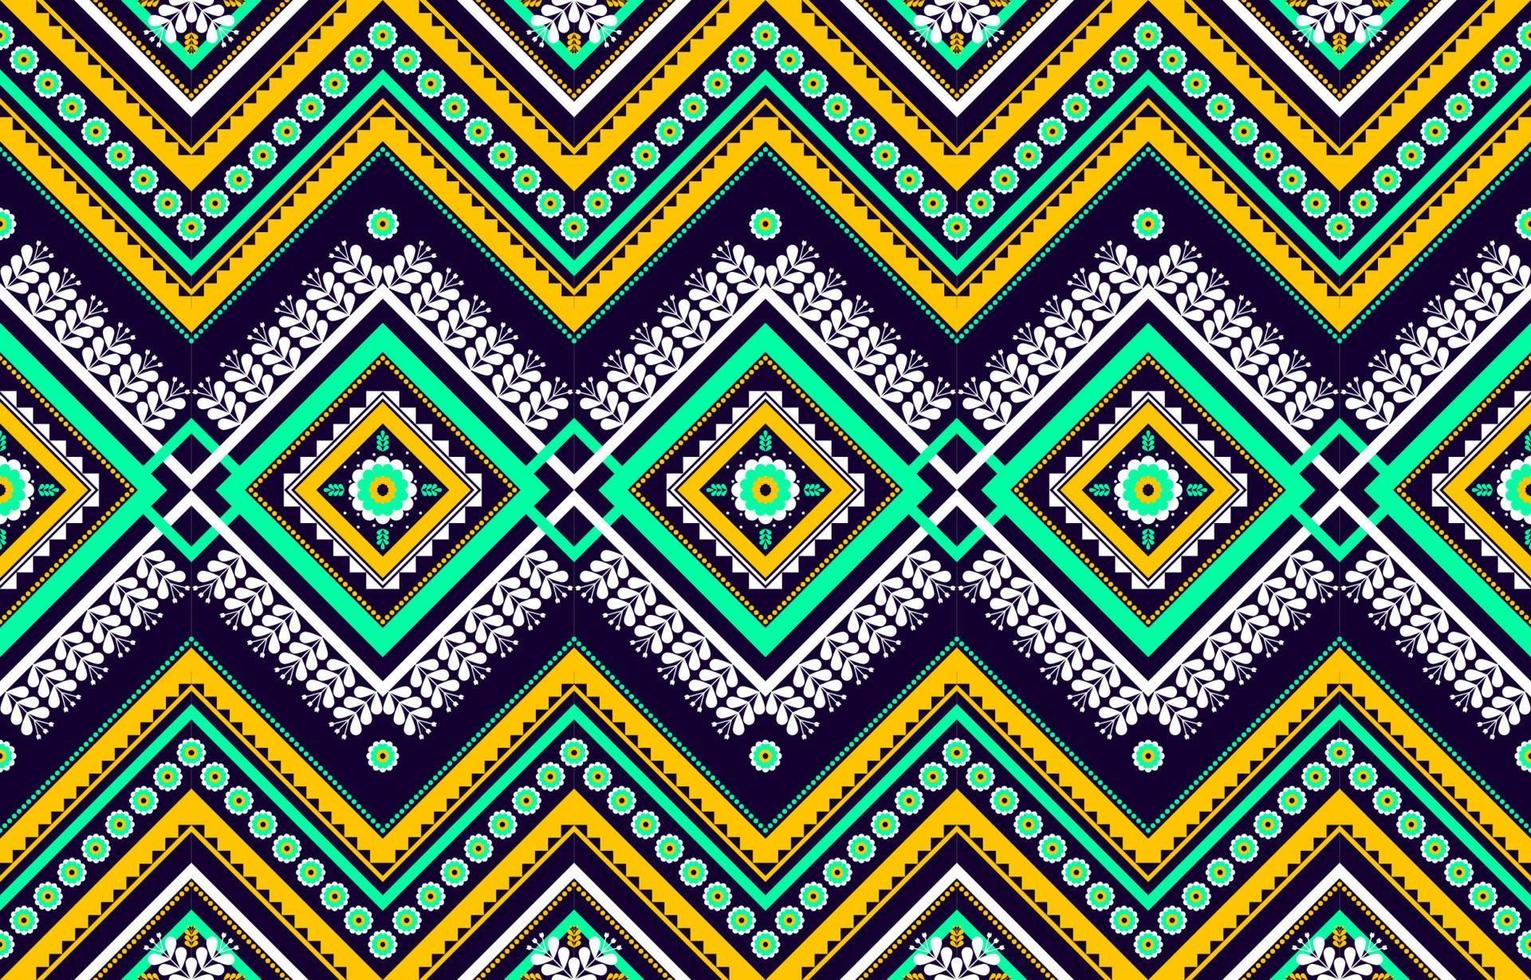 Geometric ethnic seamless pattern traditional. Oriental tribal striped. Flower decoration. Design for background,illustration,fabric,batik,clothing,wrapping,wallpaper,carpet,embroidery vector